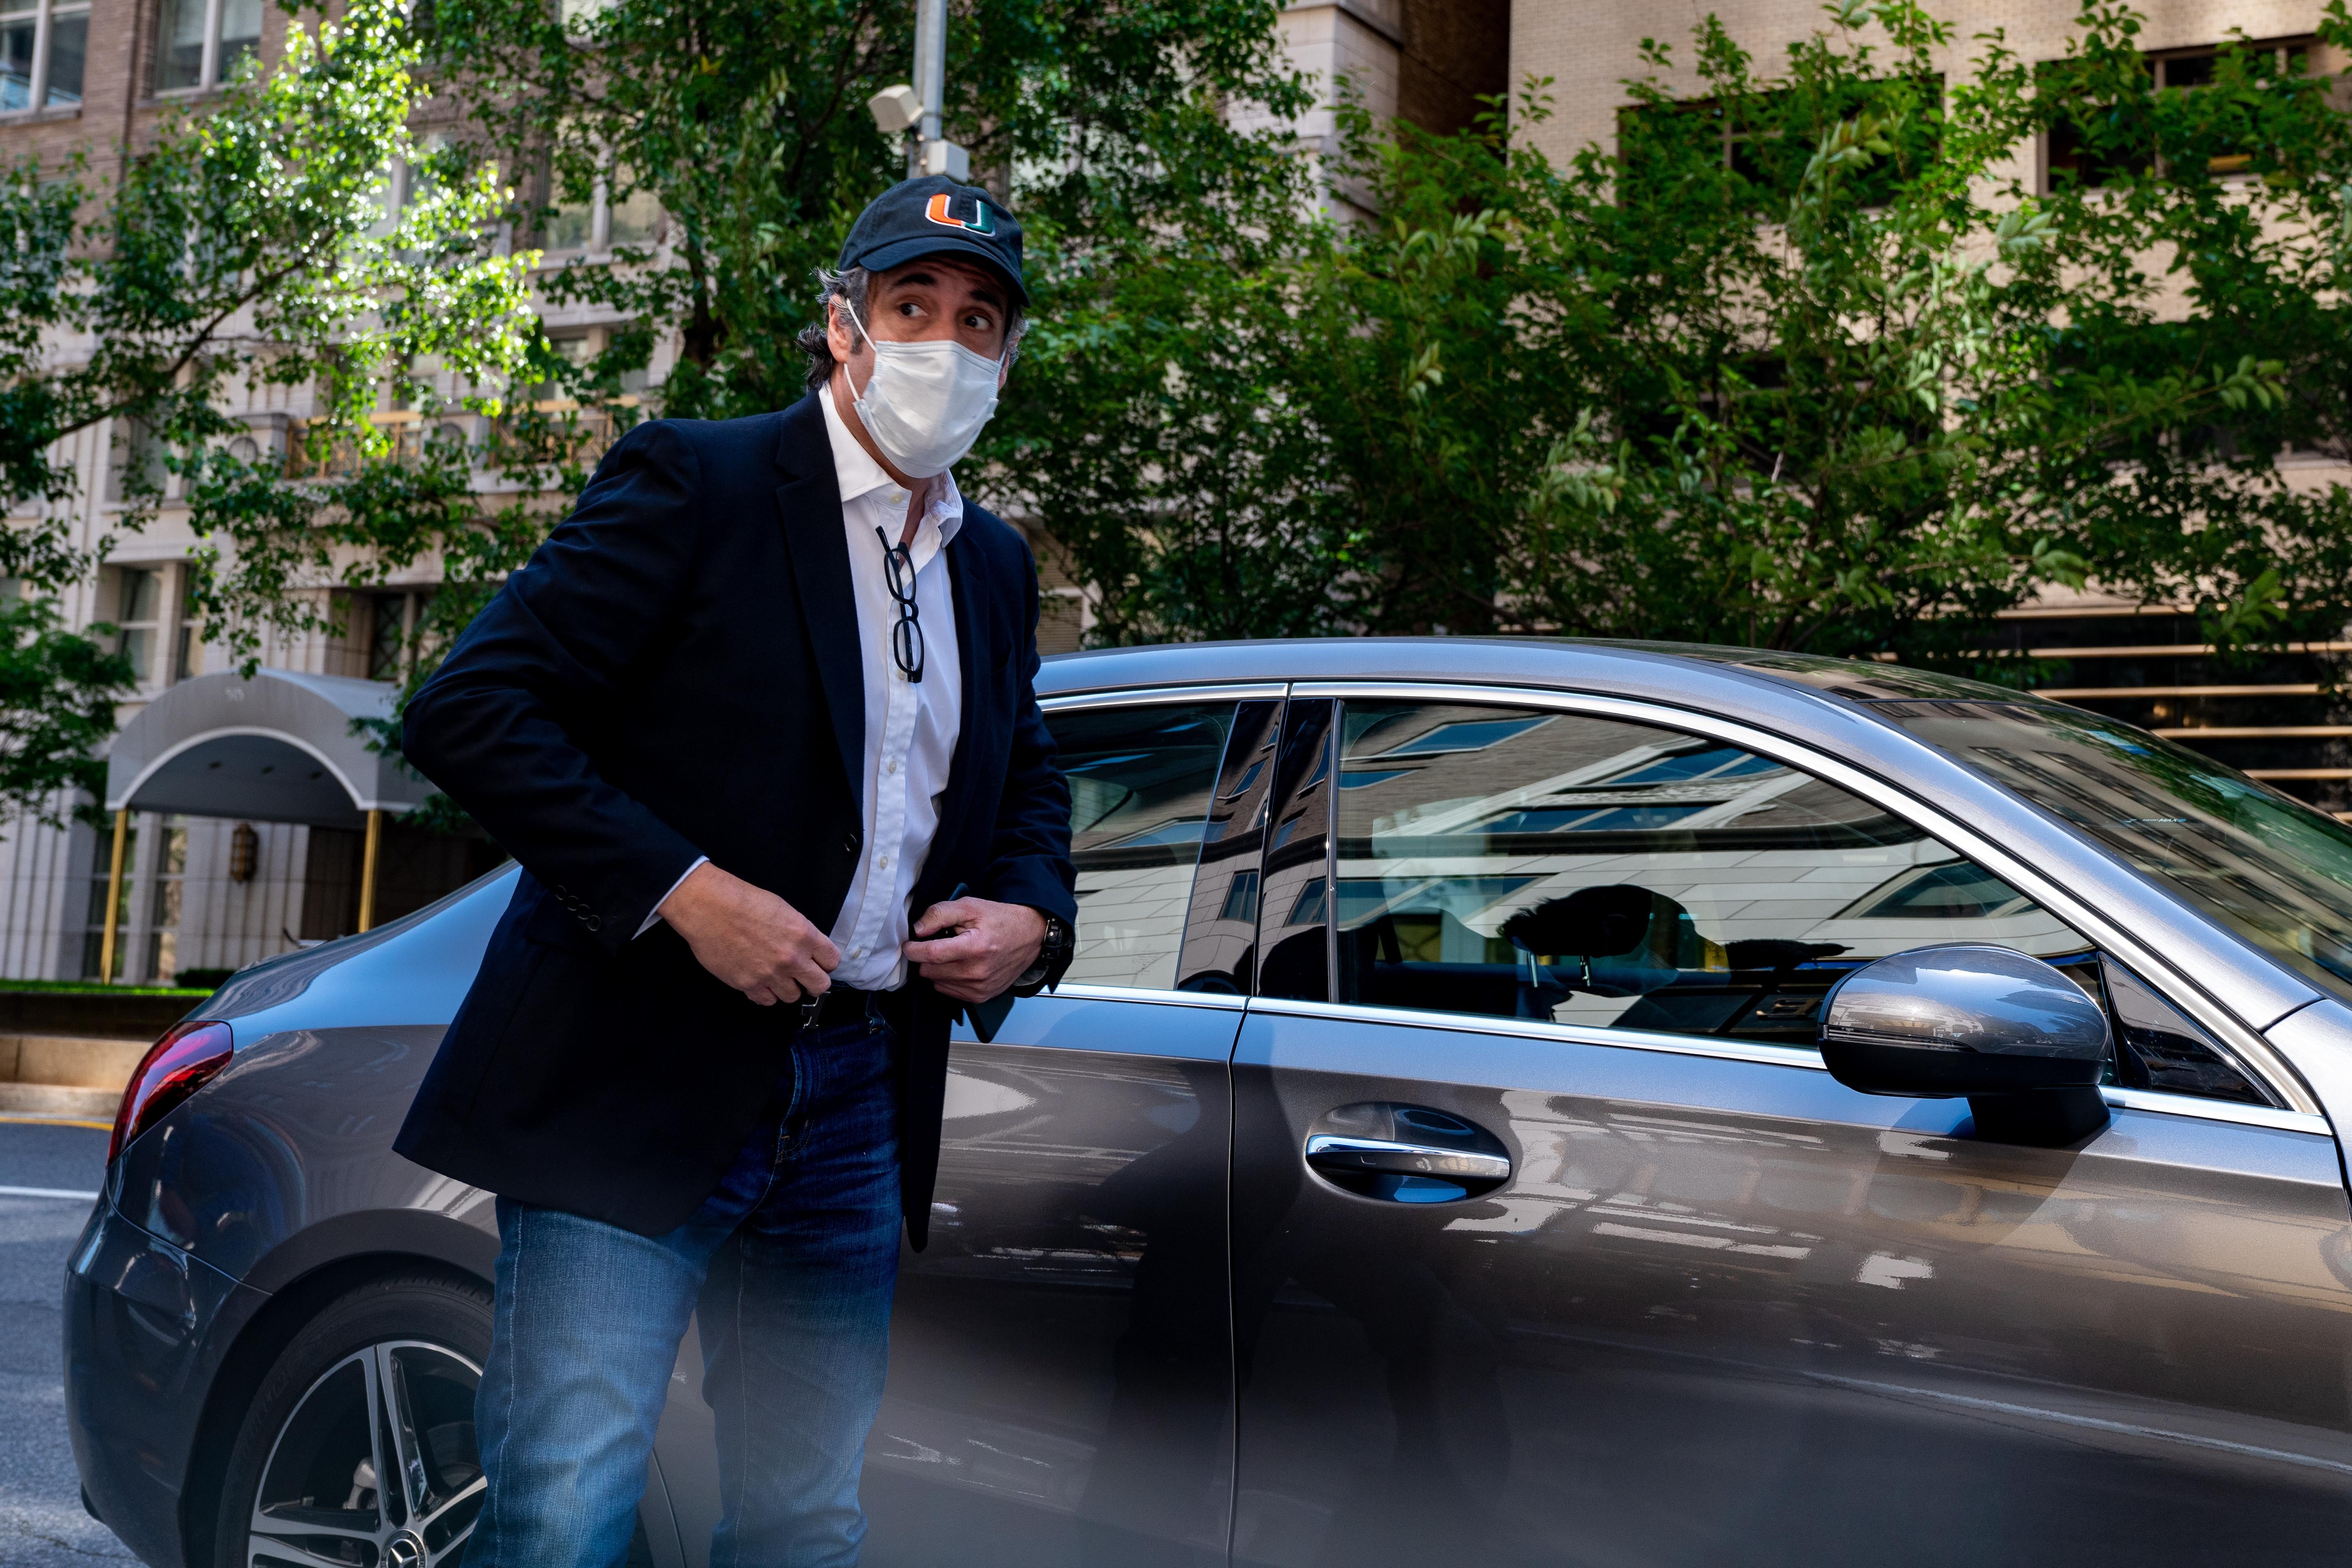 Michael Cohen is seen wearing a face mask next to a car.